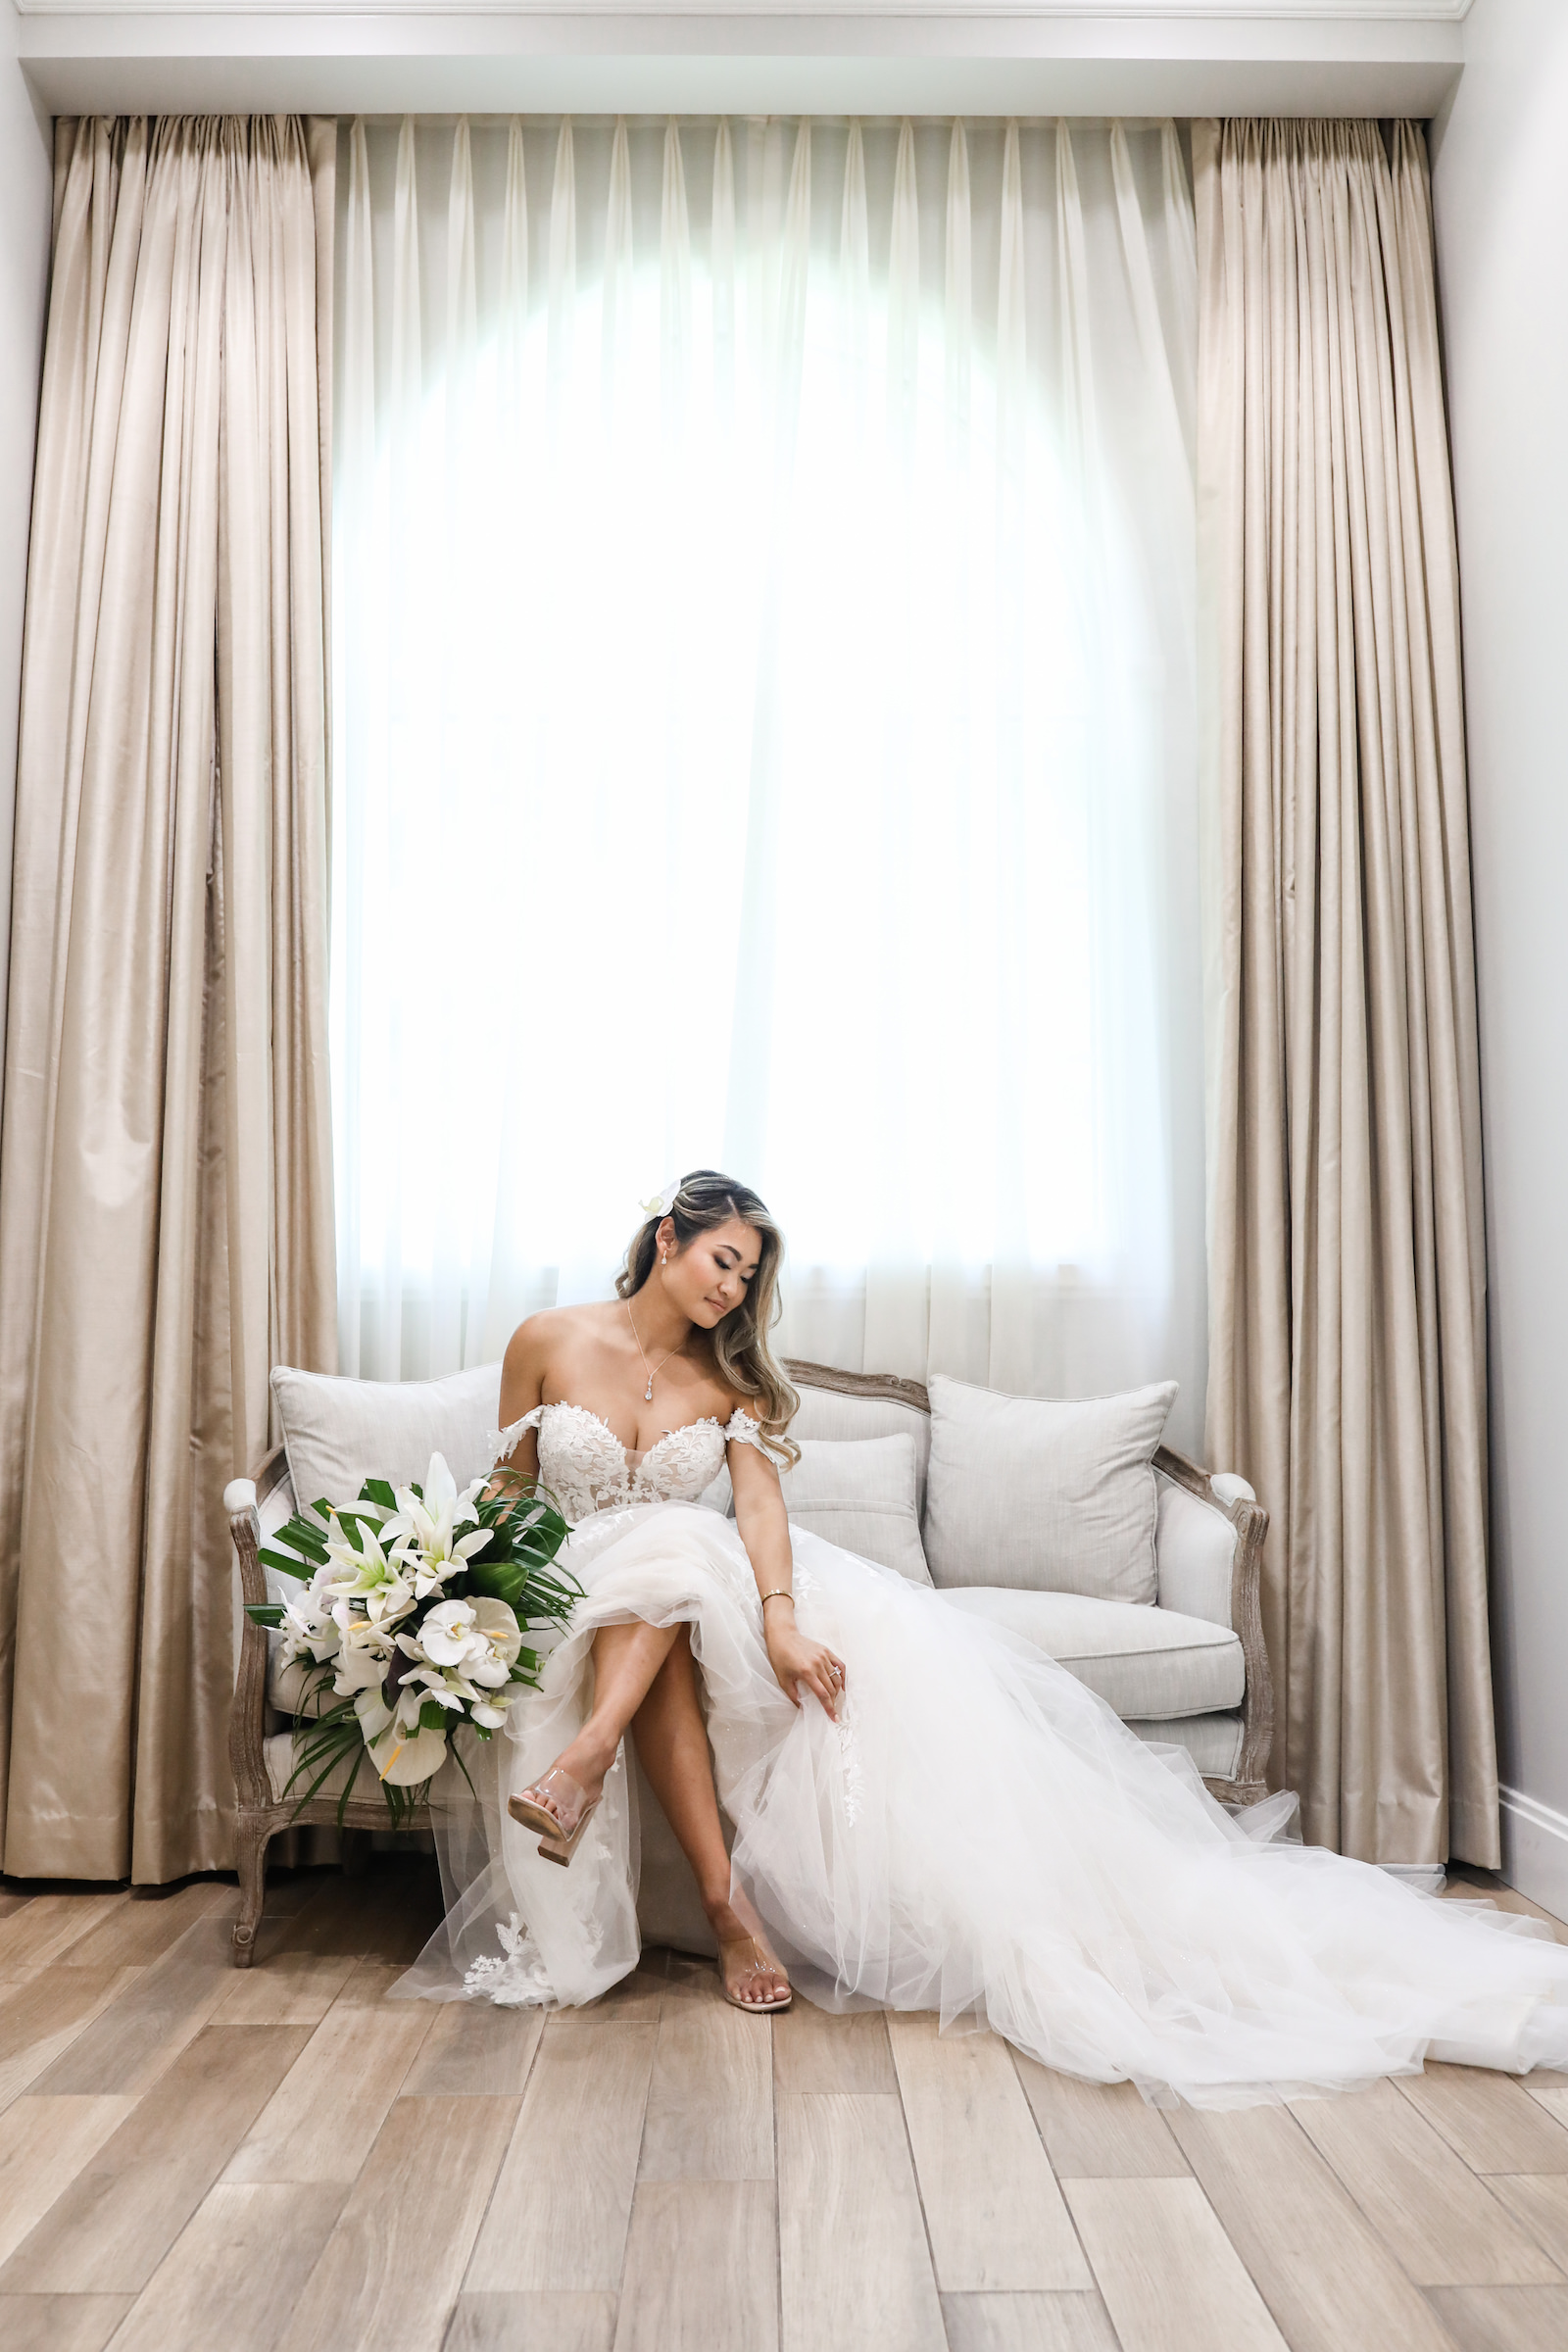 Bridal Portrait of Modern Bride with Headpiece | Tampa Hair and Makeup Savannah Olivia Beauty Boutique | Tampa Photographer Lifelong Photography